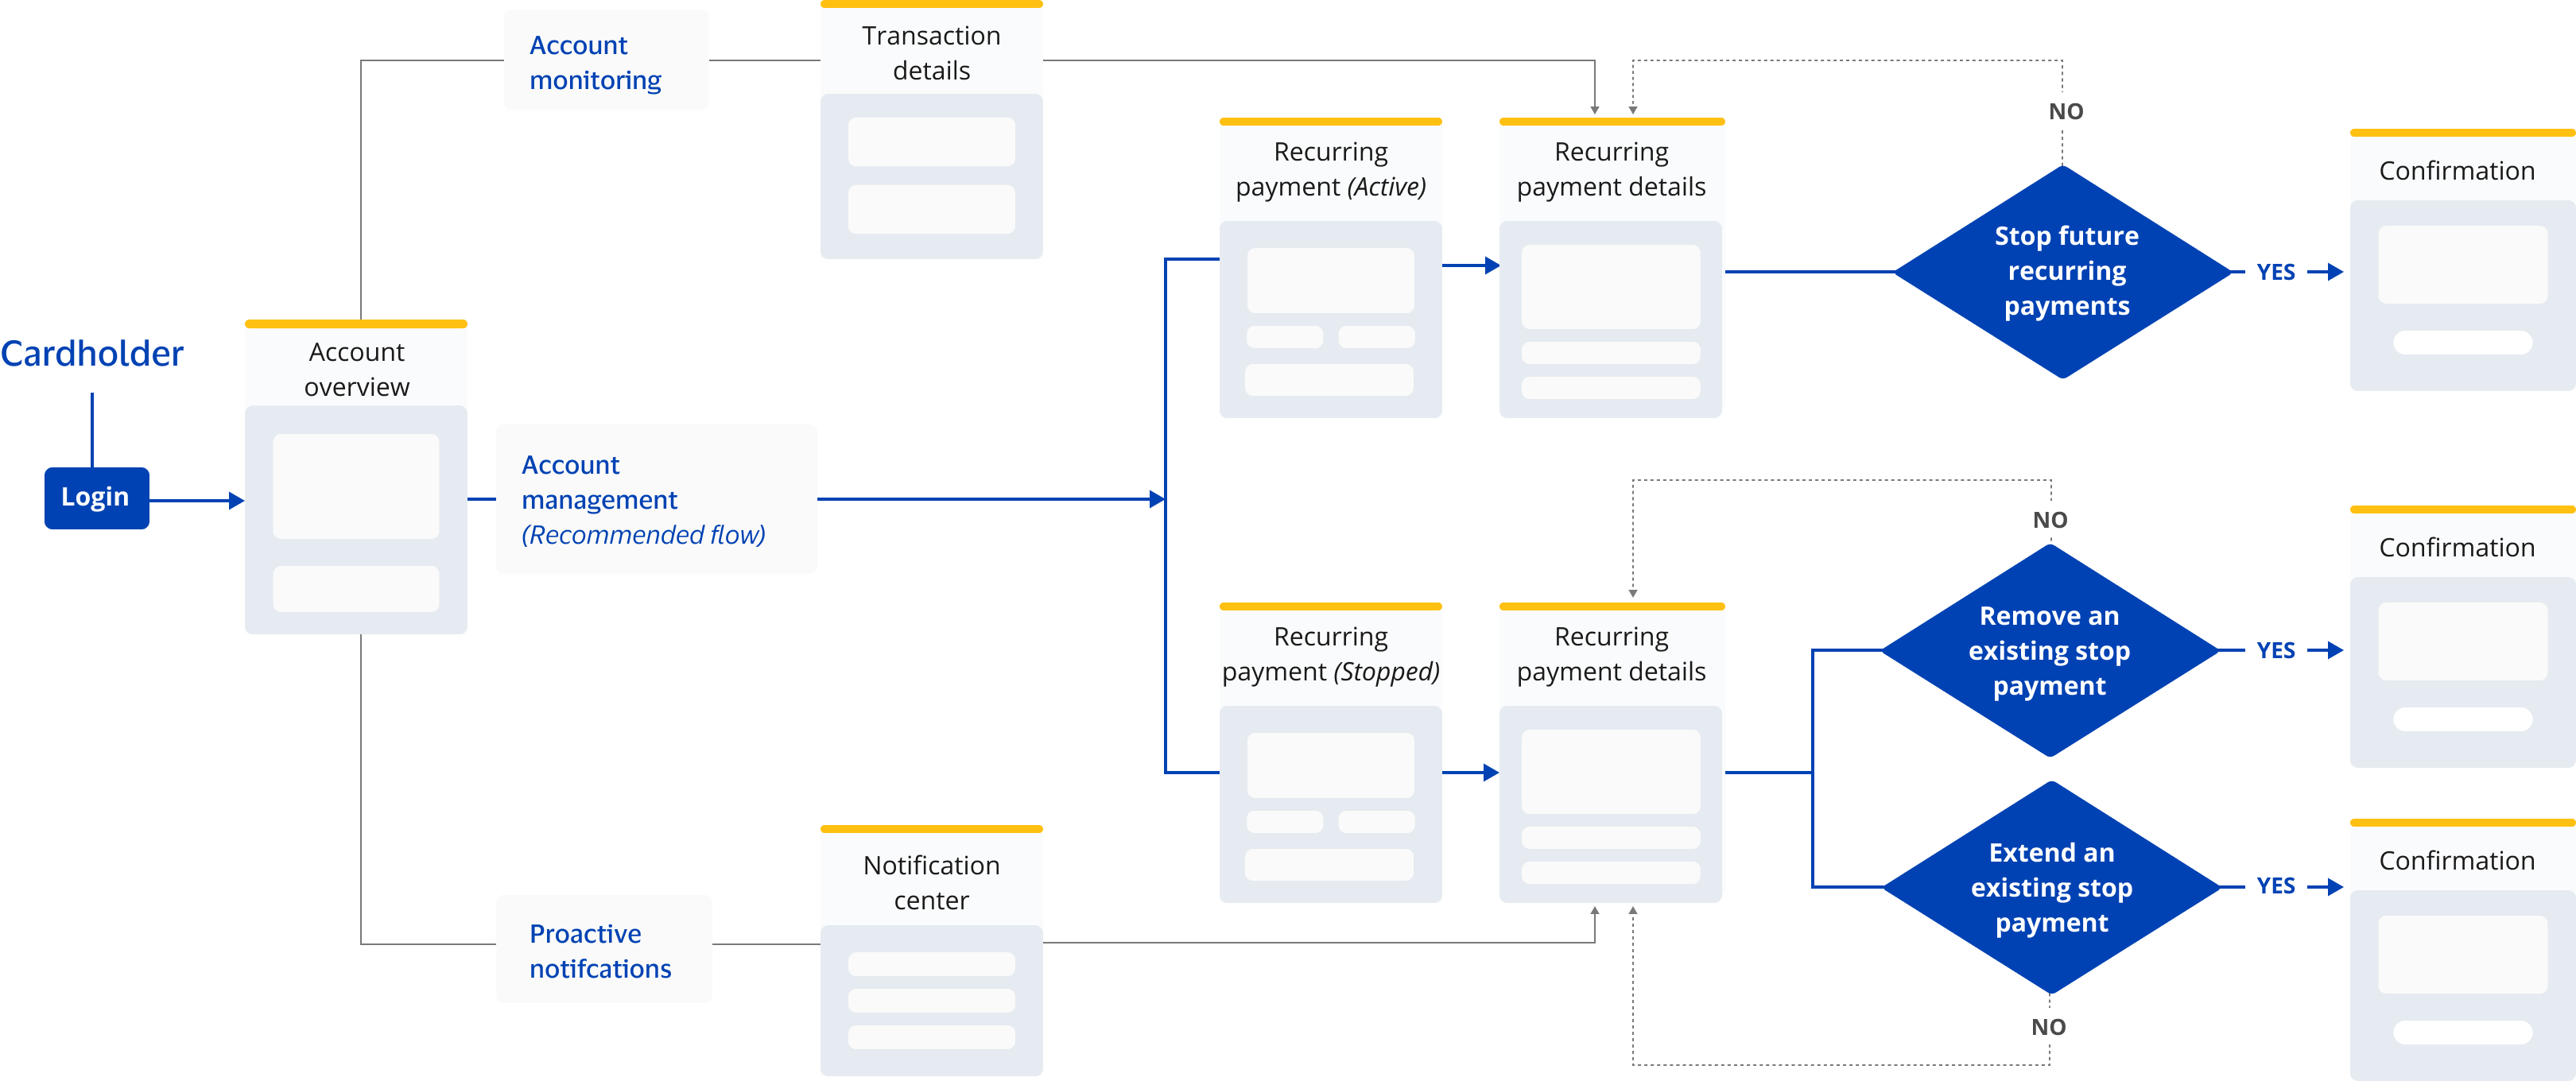 Userflow of how a cardholder can access VSPS on an issuer's web/mobile application